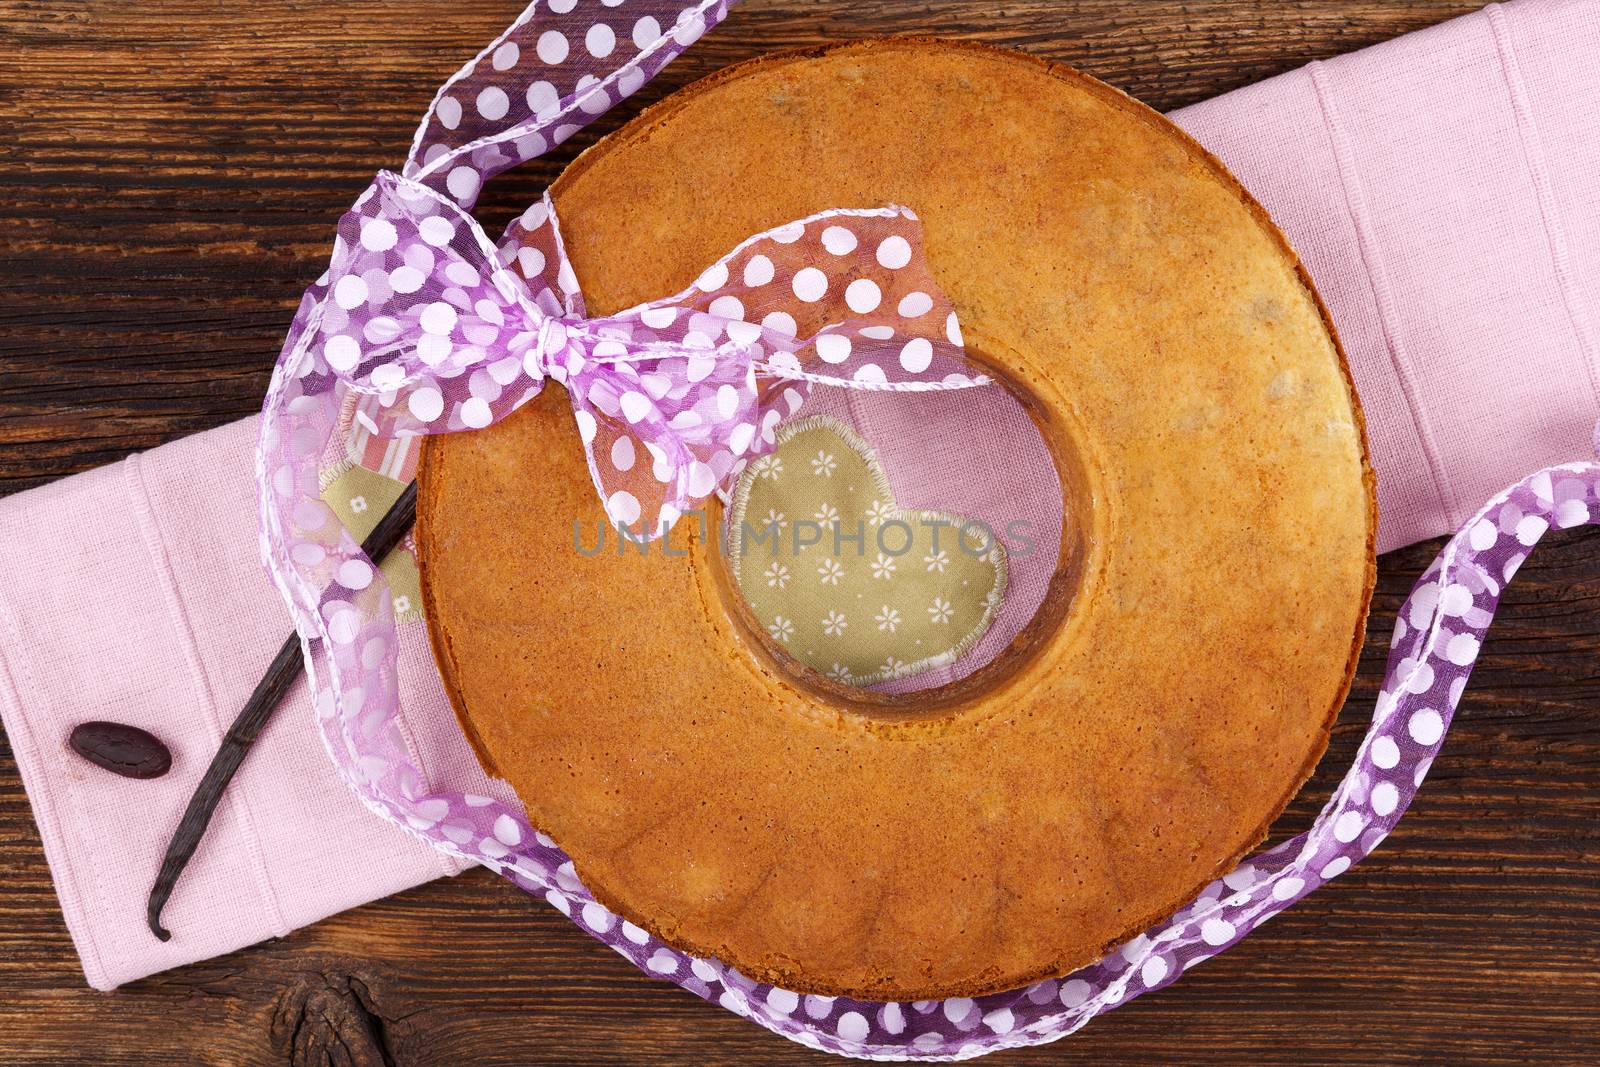 Delicious bundt cake on wooden table, top view. Traditional european sweet bundt cake.